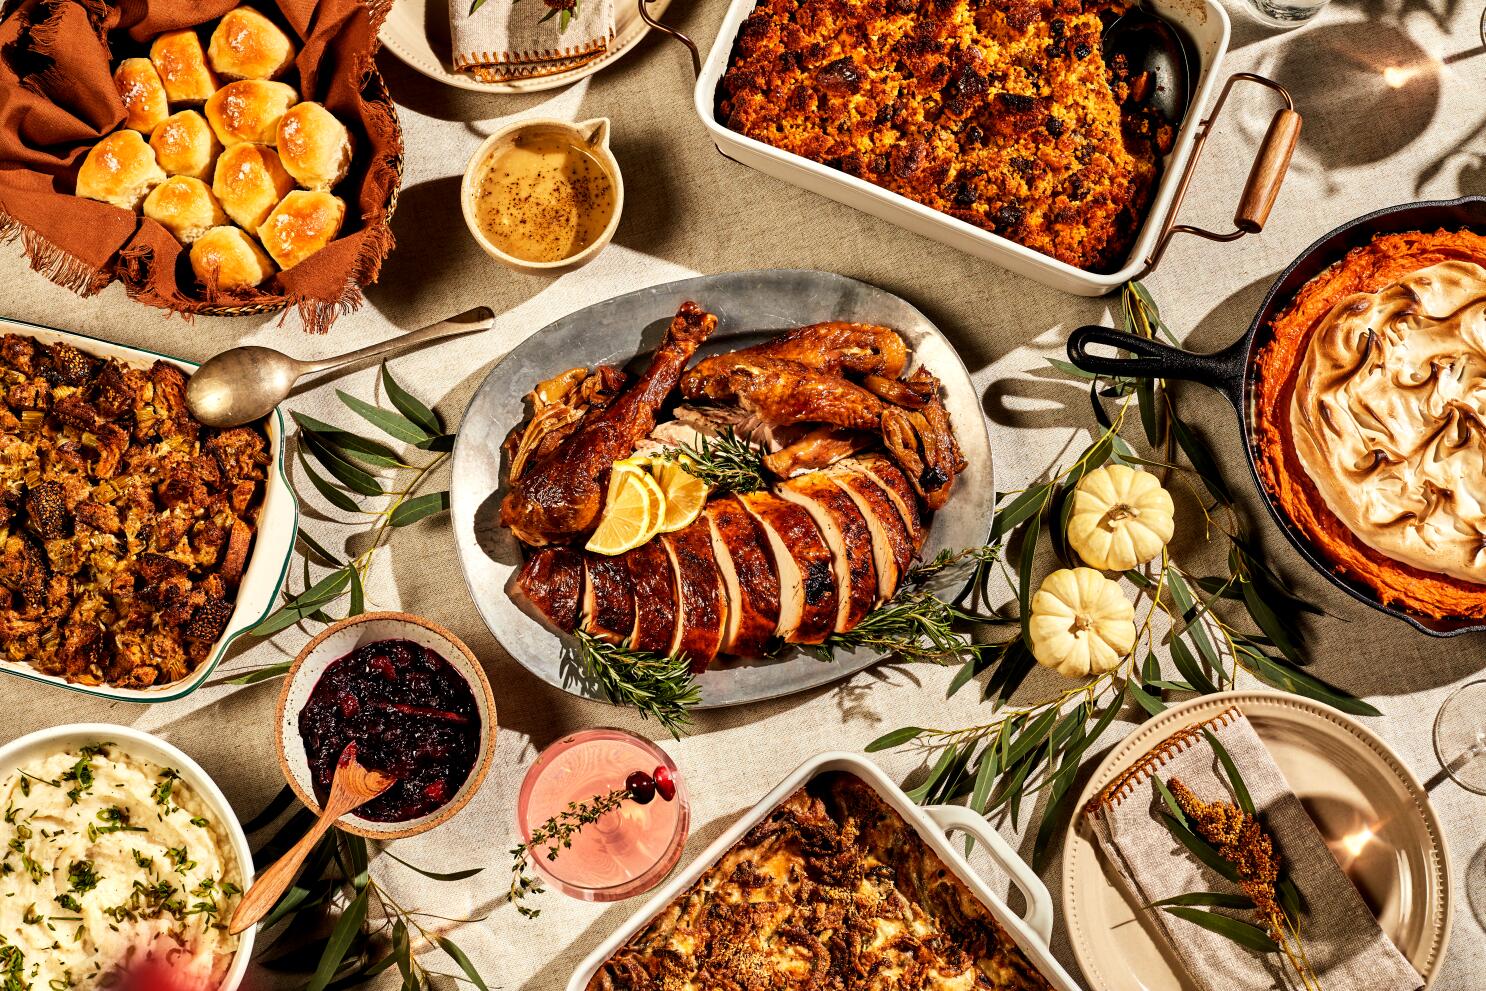 CLASSIC THANKSGIVING DINNER & DESSERT RECIPES~ THE COMPLETE MEAL